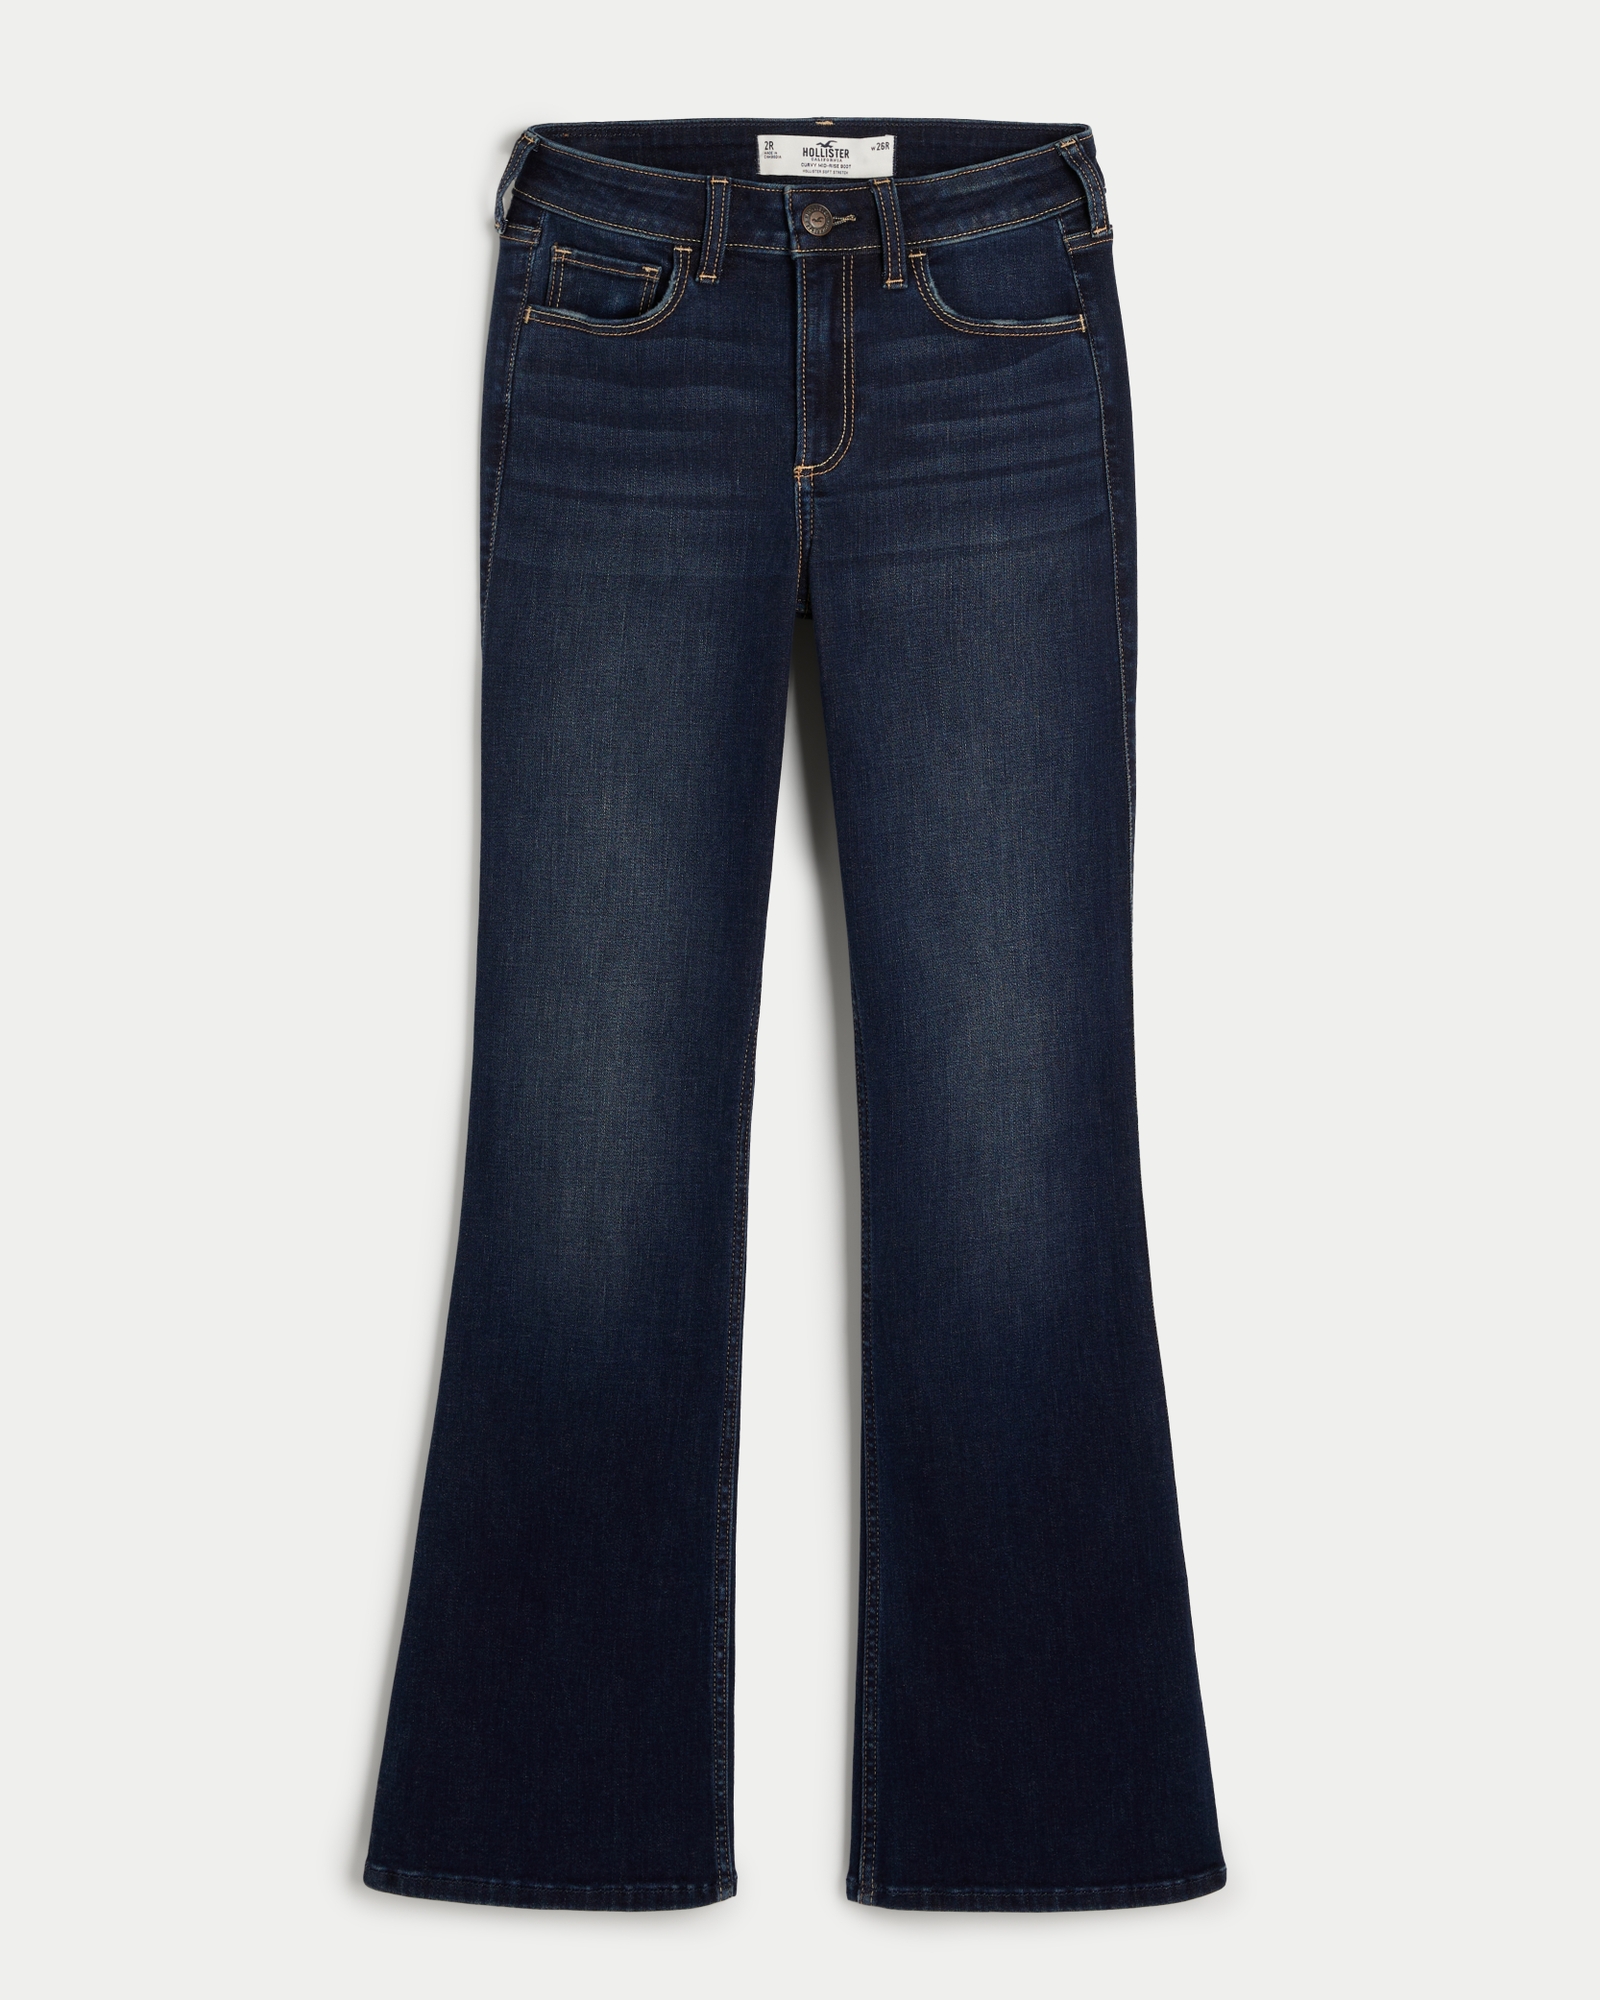 Women's Curvy Mid-Rise Washed Black Boot Jeans - Hollister Co.